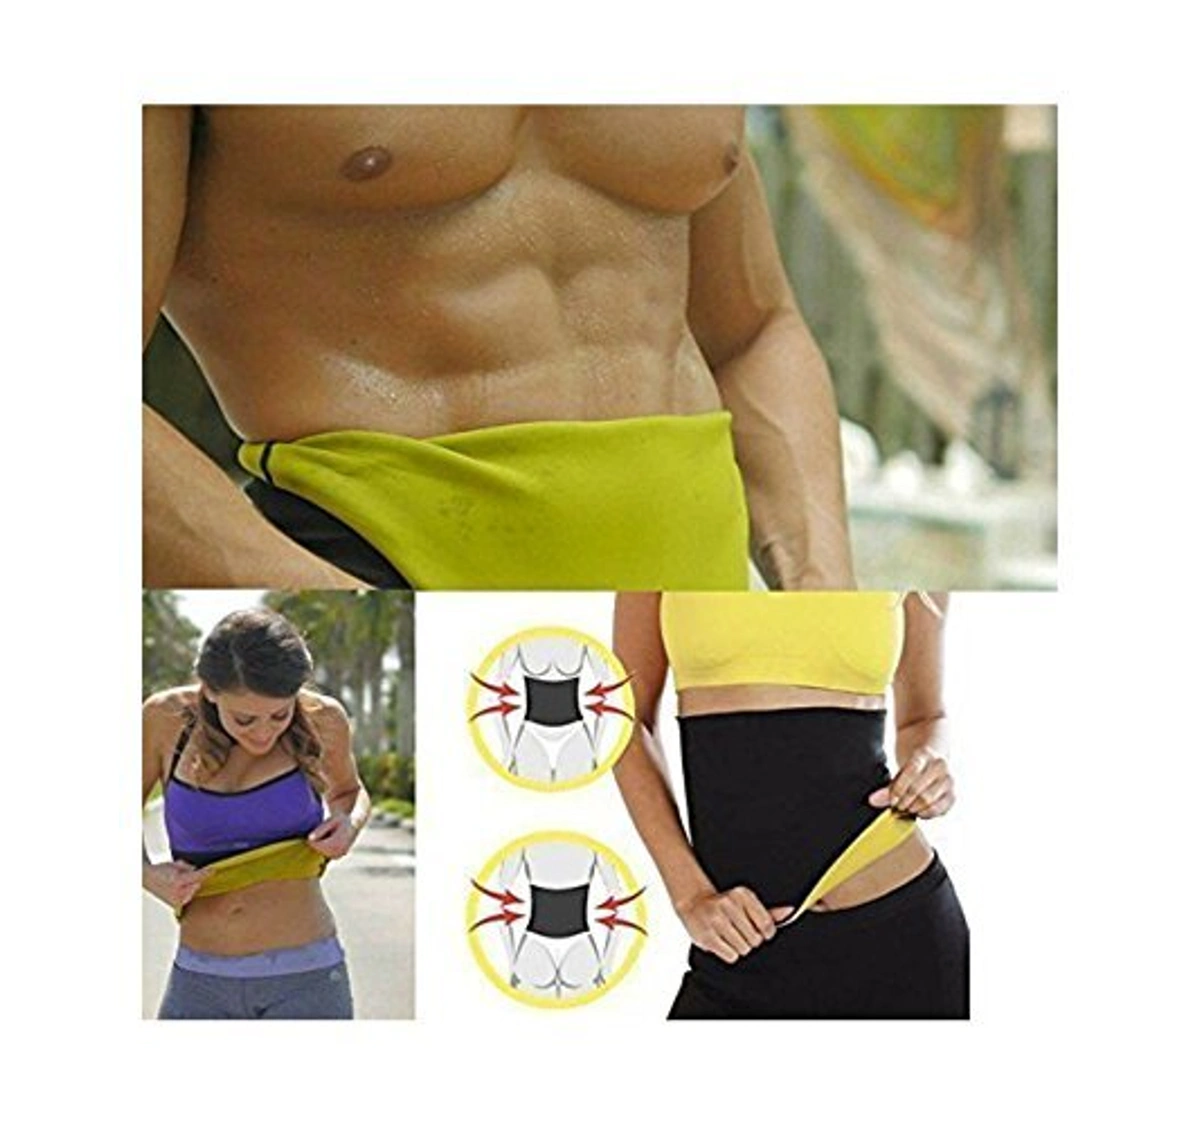 Buy Hot Slimming Shaper Belt (Pack Of 1 - Multicolor) at Sehgall